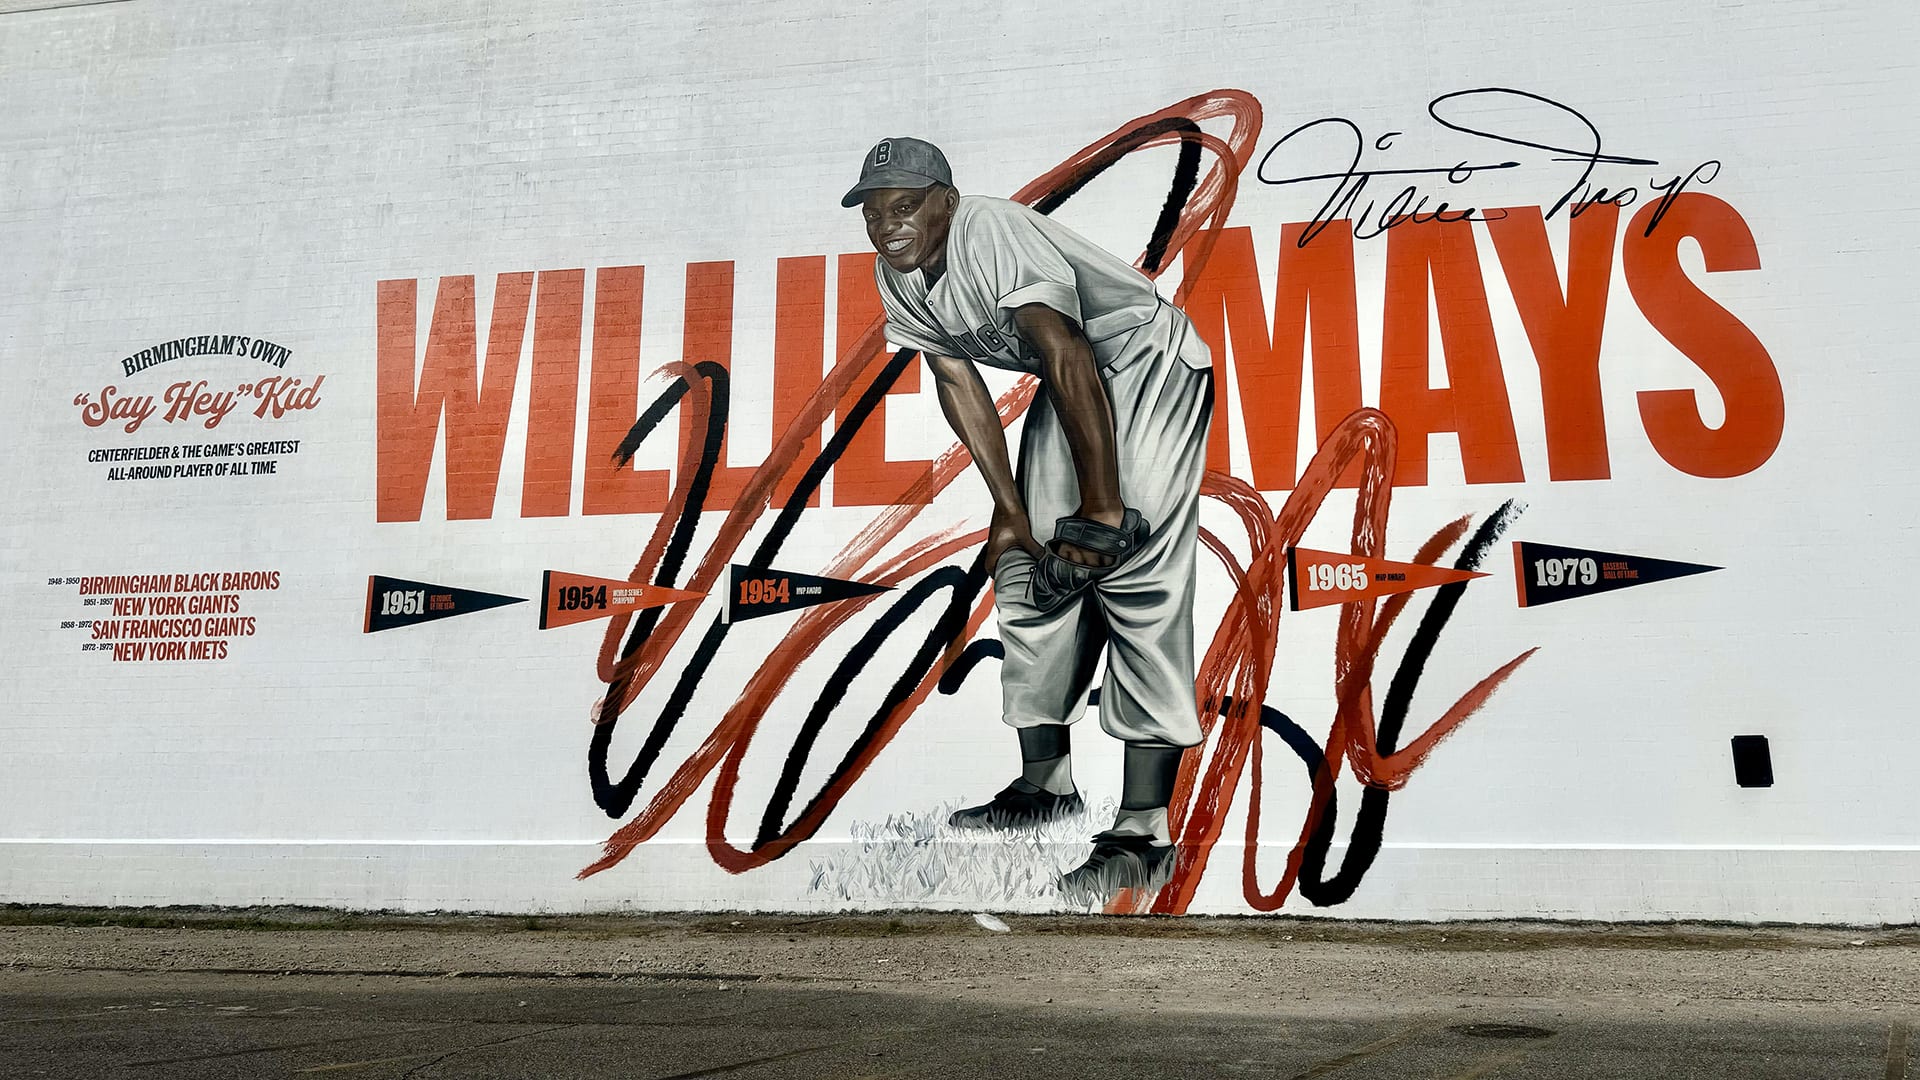 A new mural of Willie Mays was unveiled in Birmingham